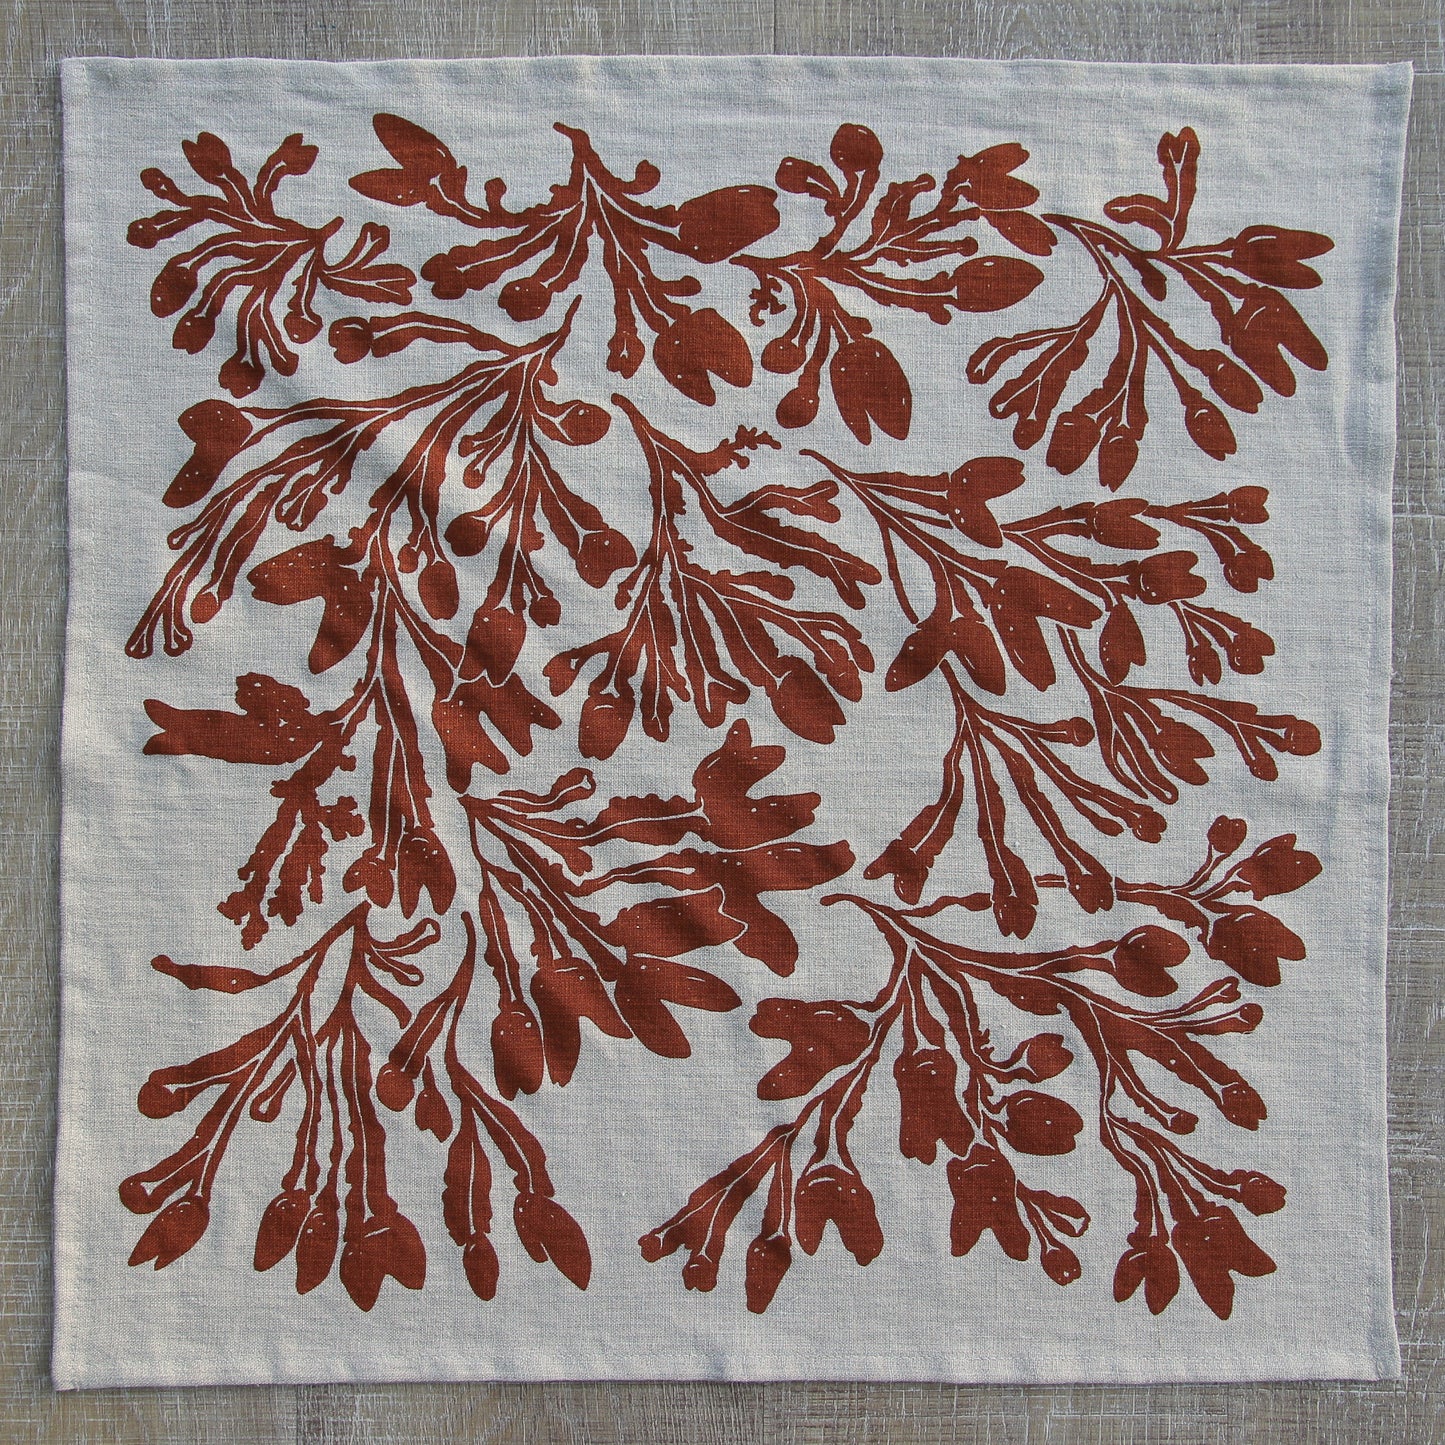 Seaweed Napkin in Red Ochre on Natural Linen